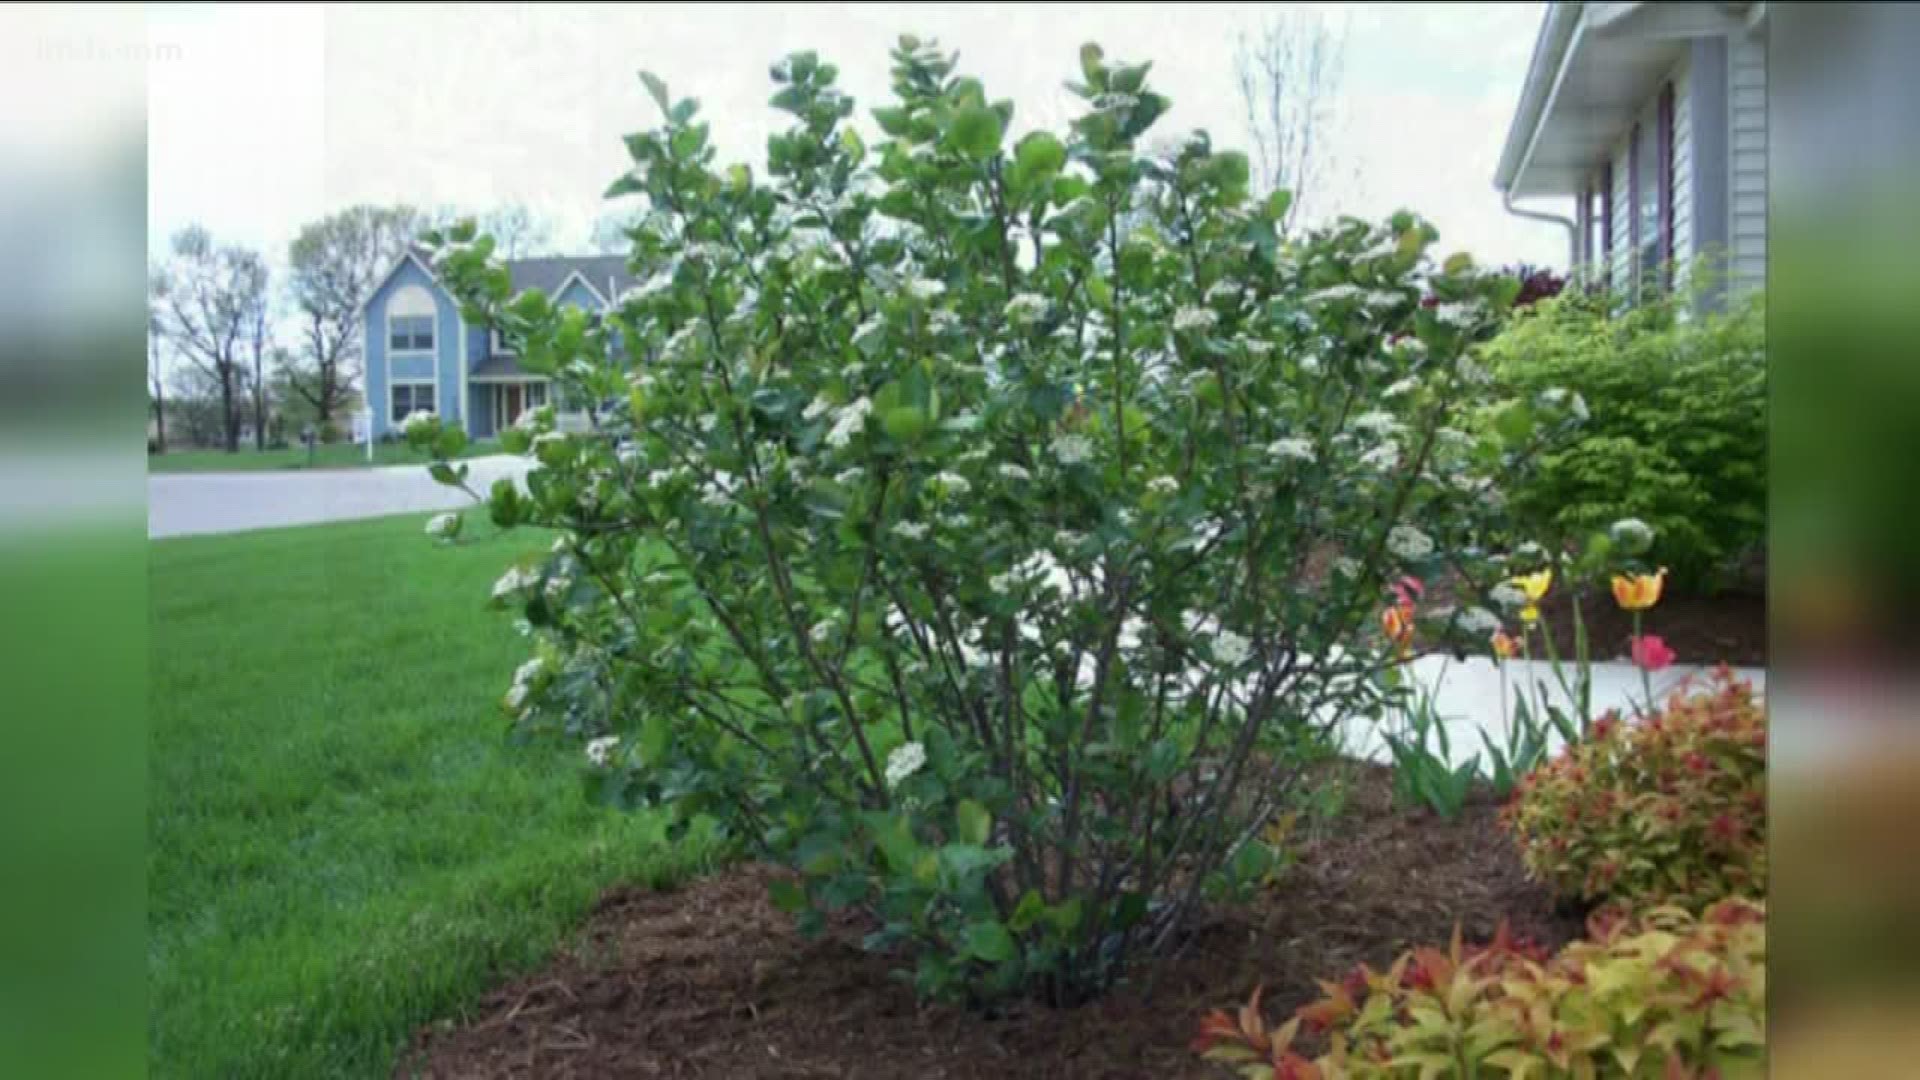 Jim Duthie shows us how to incorporate plants in your garden that will produce food.